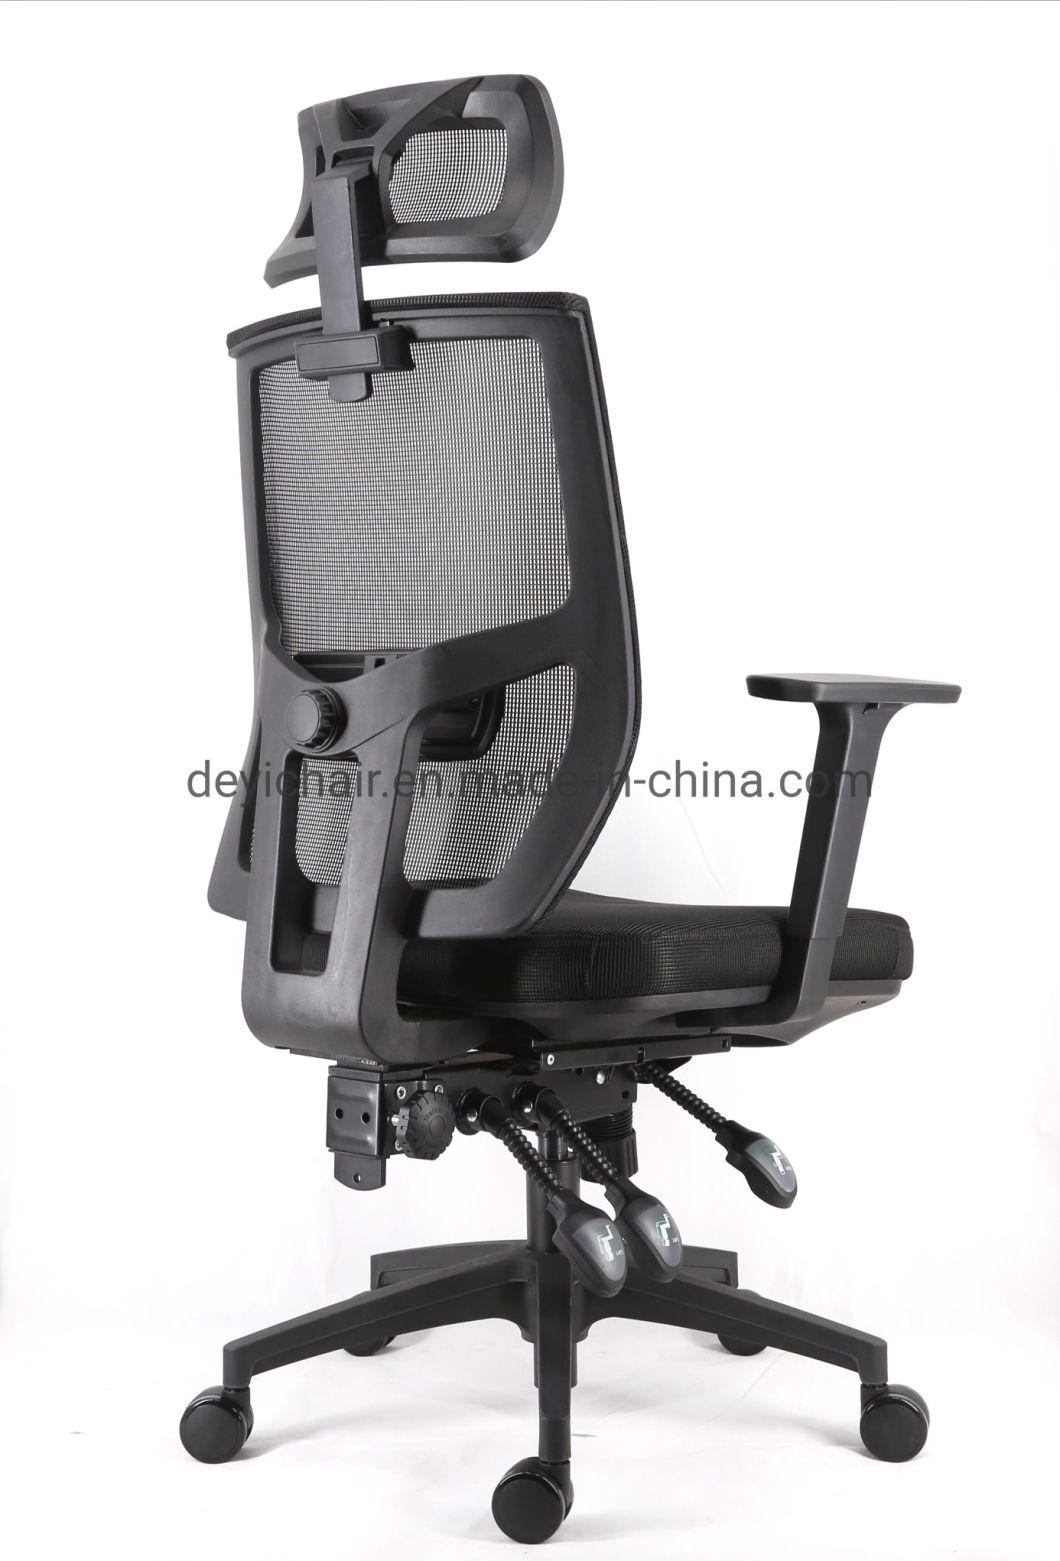 Armrest Optional with Lumbar Support Simple Function Seat up and Down Mechanism Nylon Base Manger Medium Backrest Office Chair